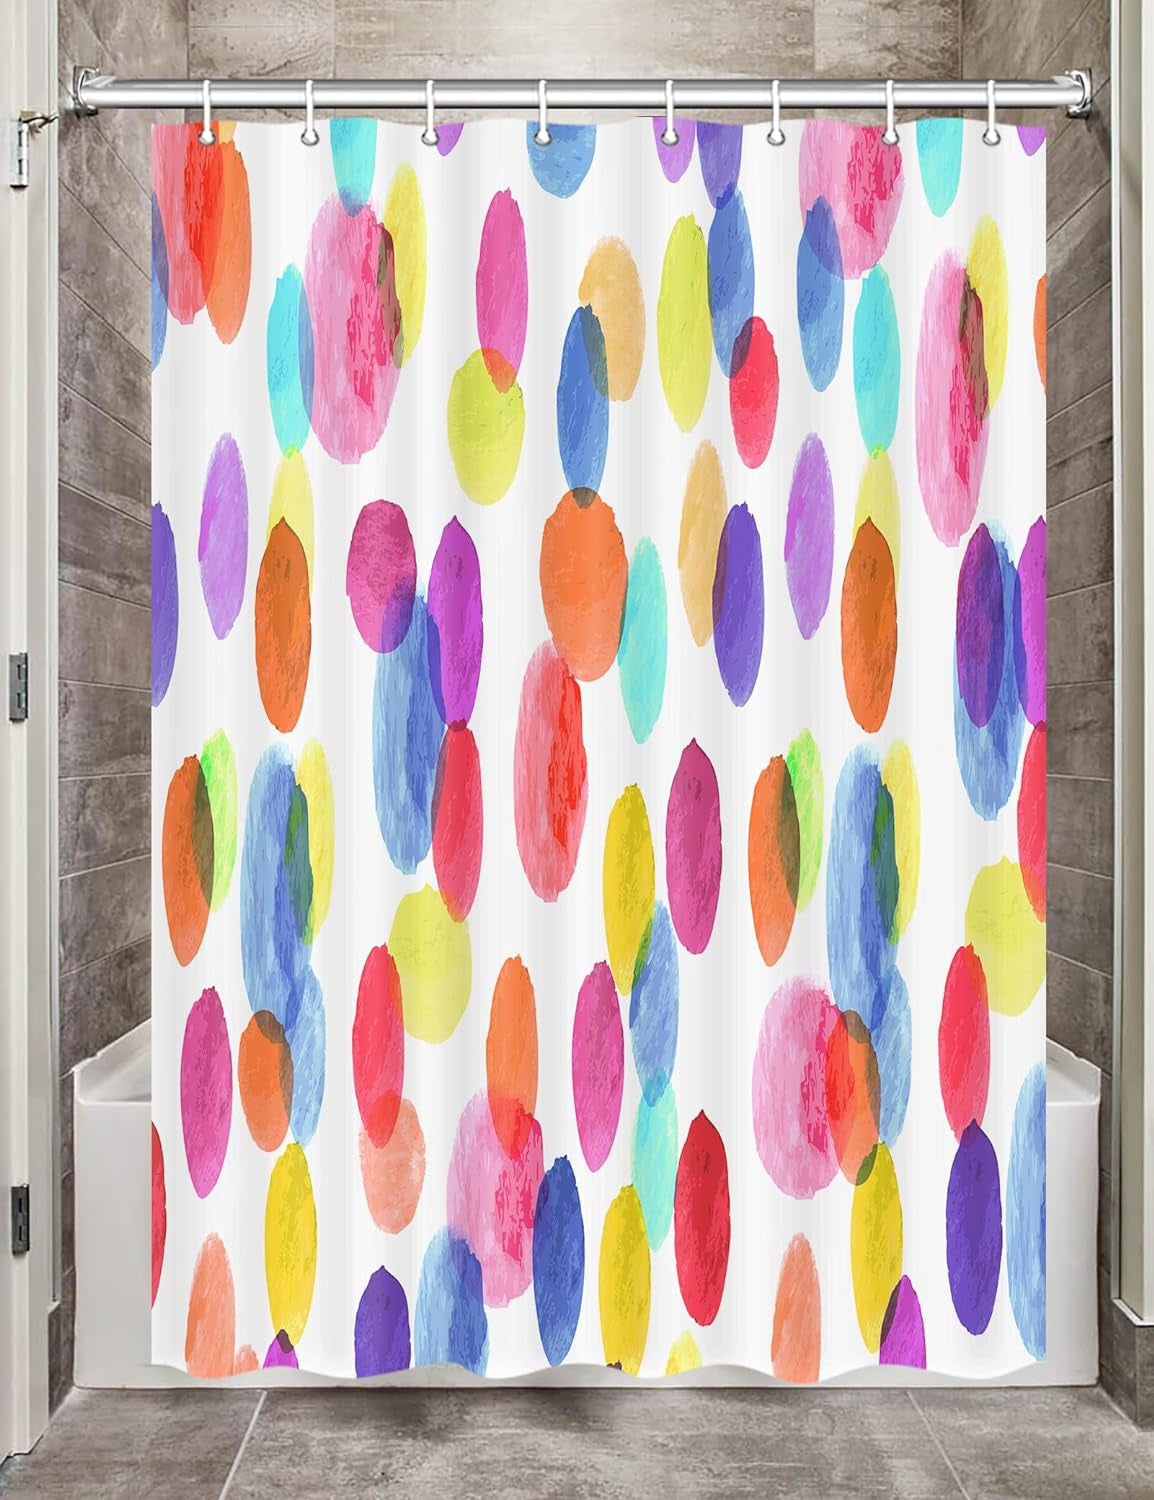 Kids Rainbow Shower Curtain for Bathroom, Colorful Geometric Cute Polka Dot Fabric Shower Curtains Set, White Modern Restroom Decor Accessories with Hooks 72X72Inches